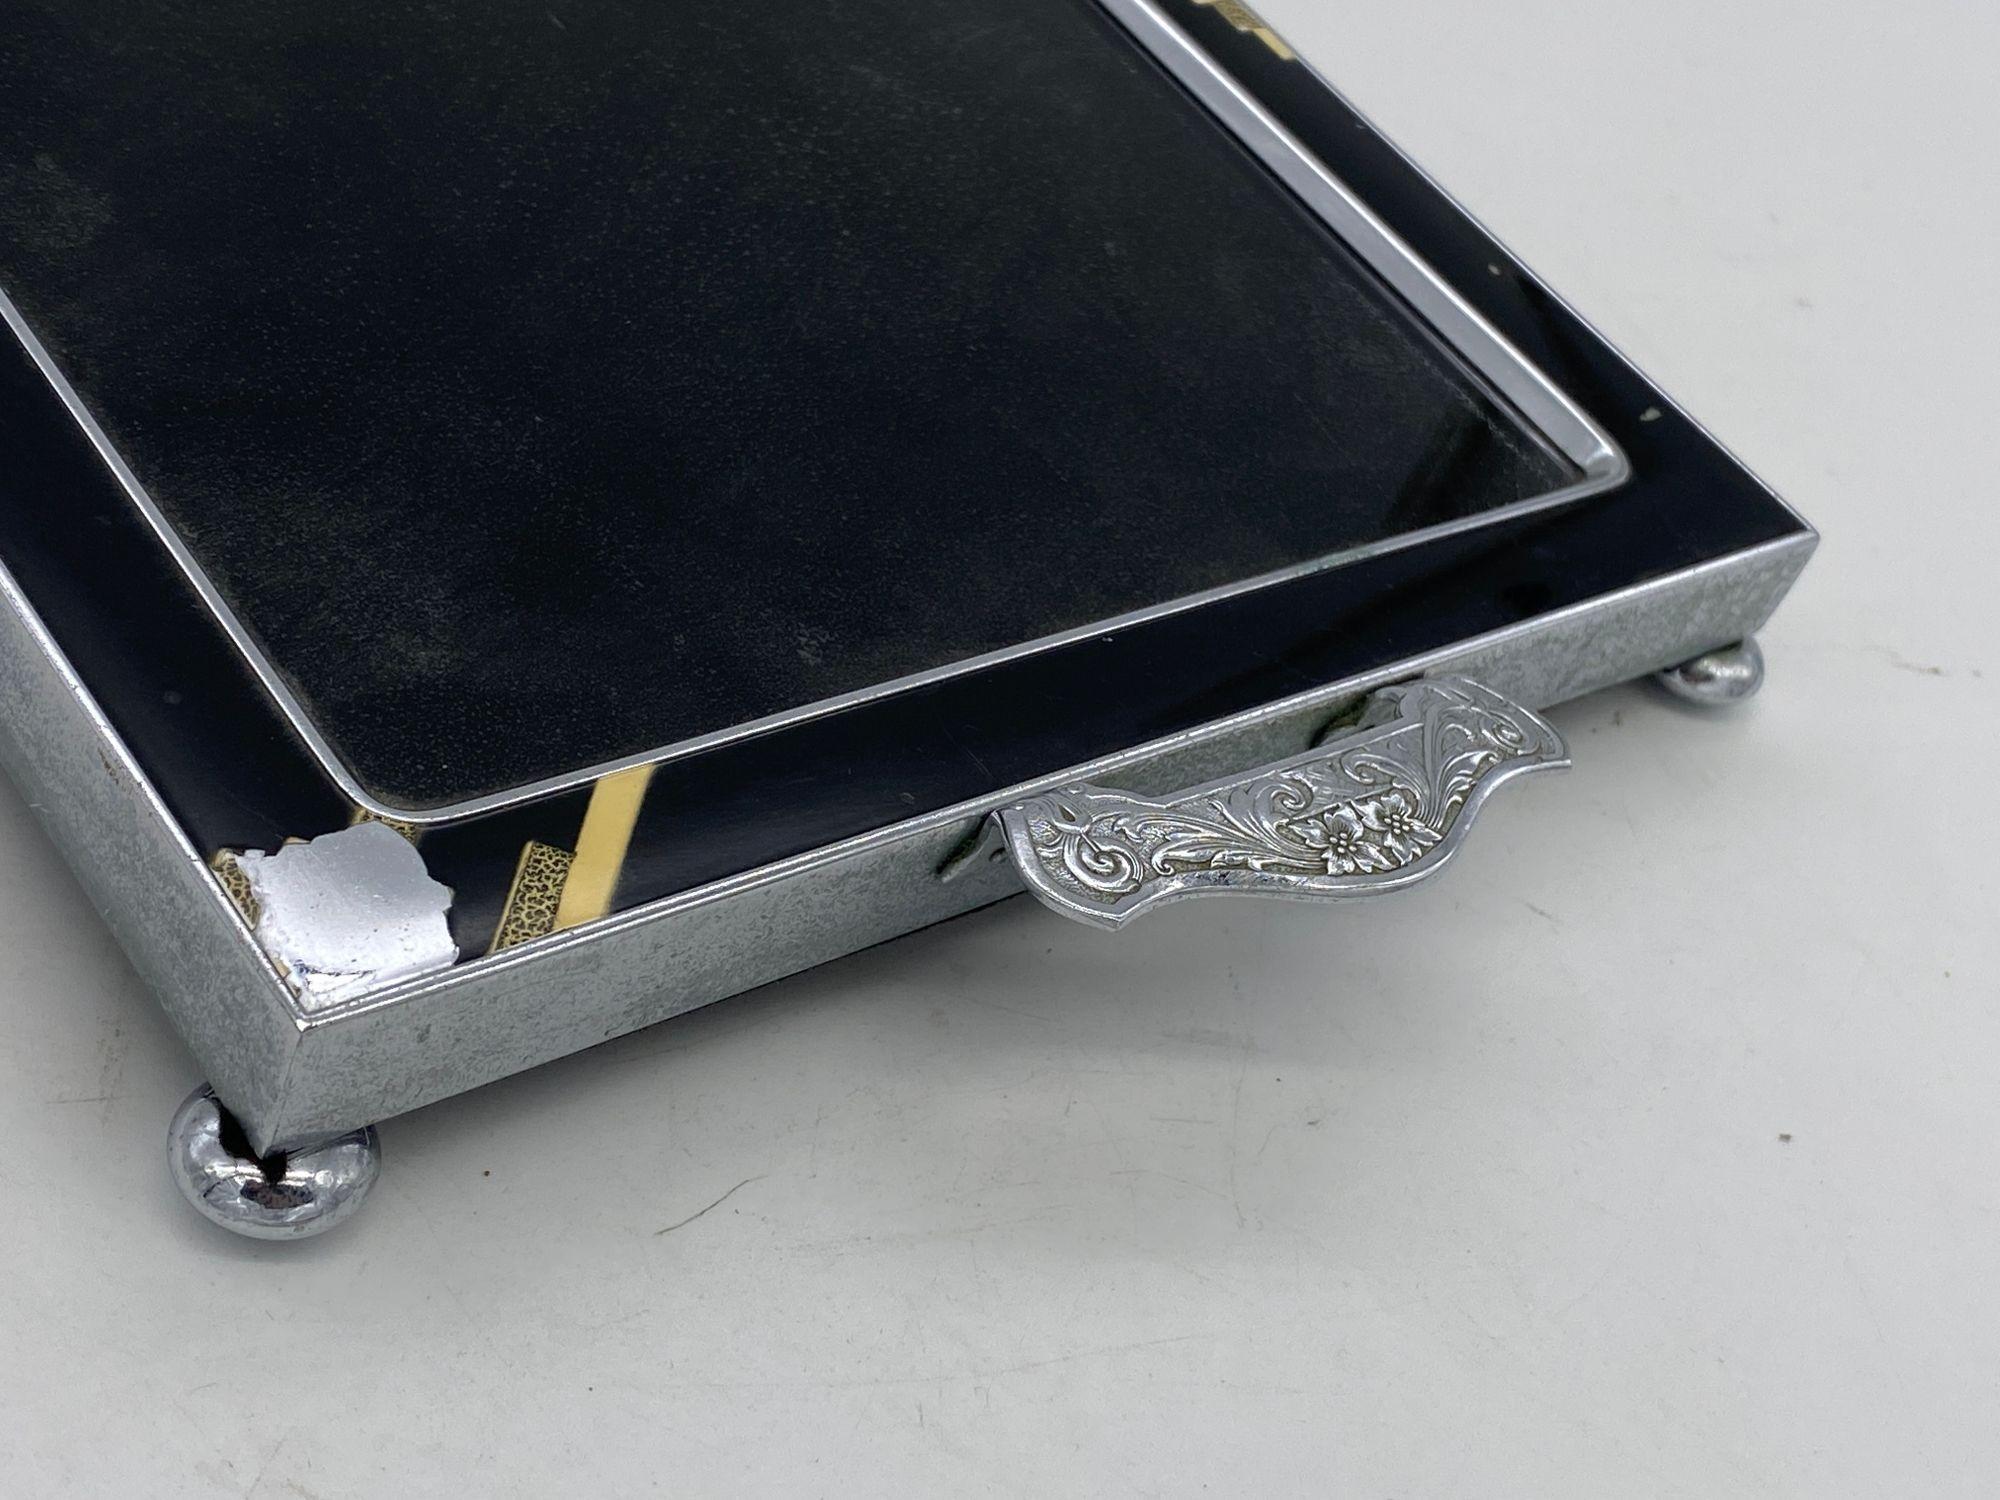 Chrome Art Deco Serving Tray with Enamel Accents and Glass Top In Excellent Condition For Sale In Van Nuys, CA